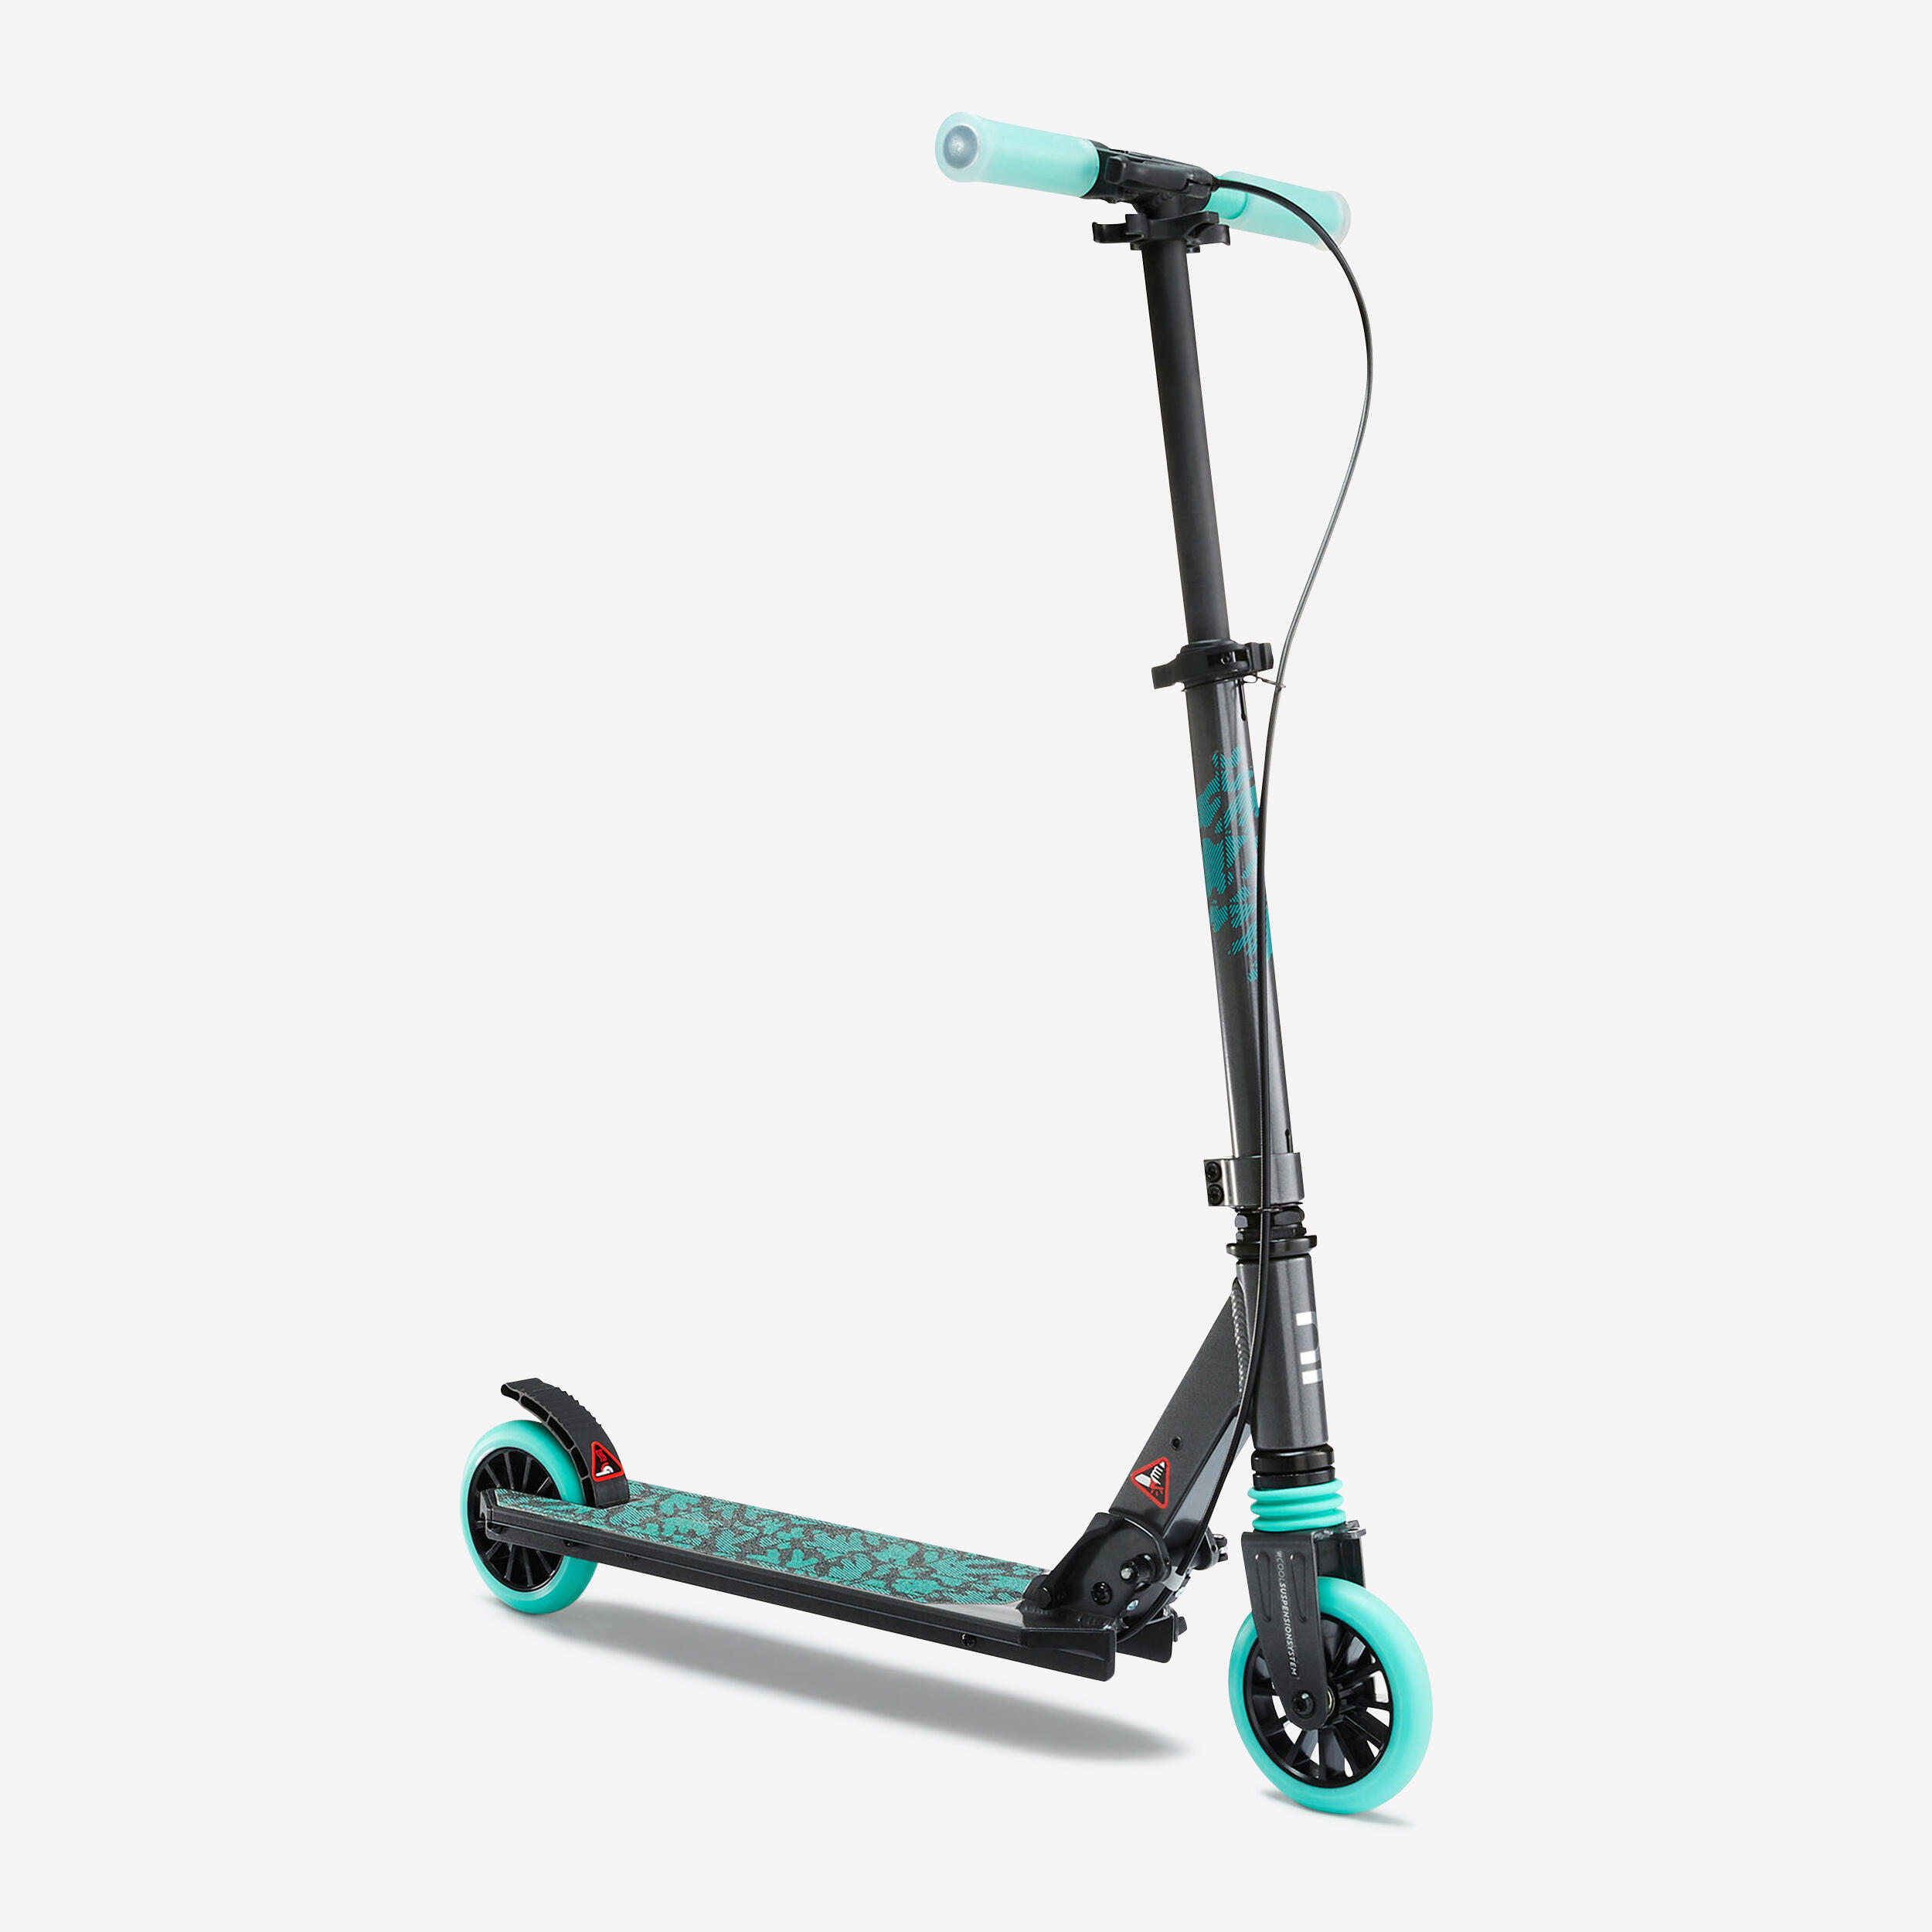 Kids' Scooter with Handlebar Brake and Suspension - MID 5